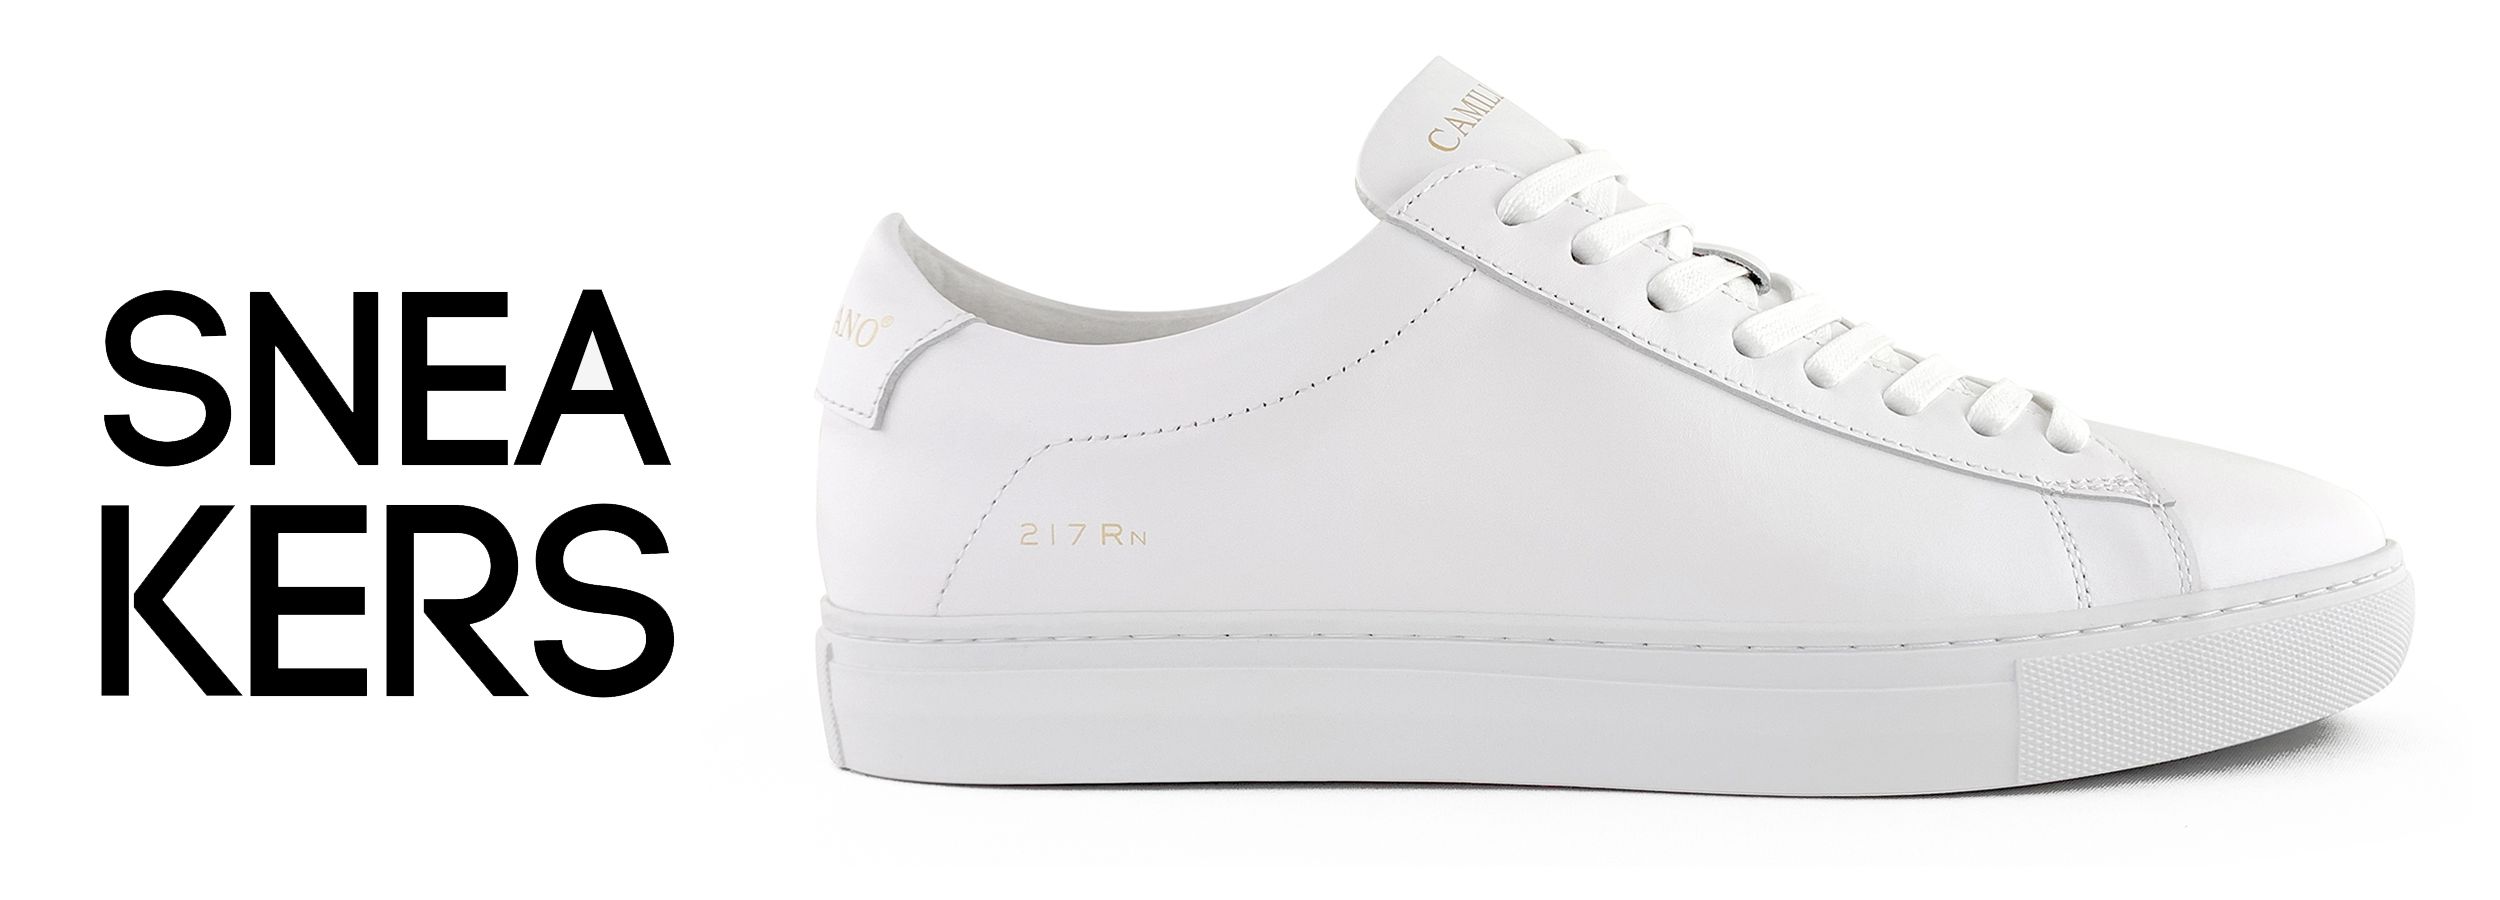 Baskets blanches, Sneakers blanches 217Rn • Camilliano